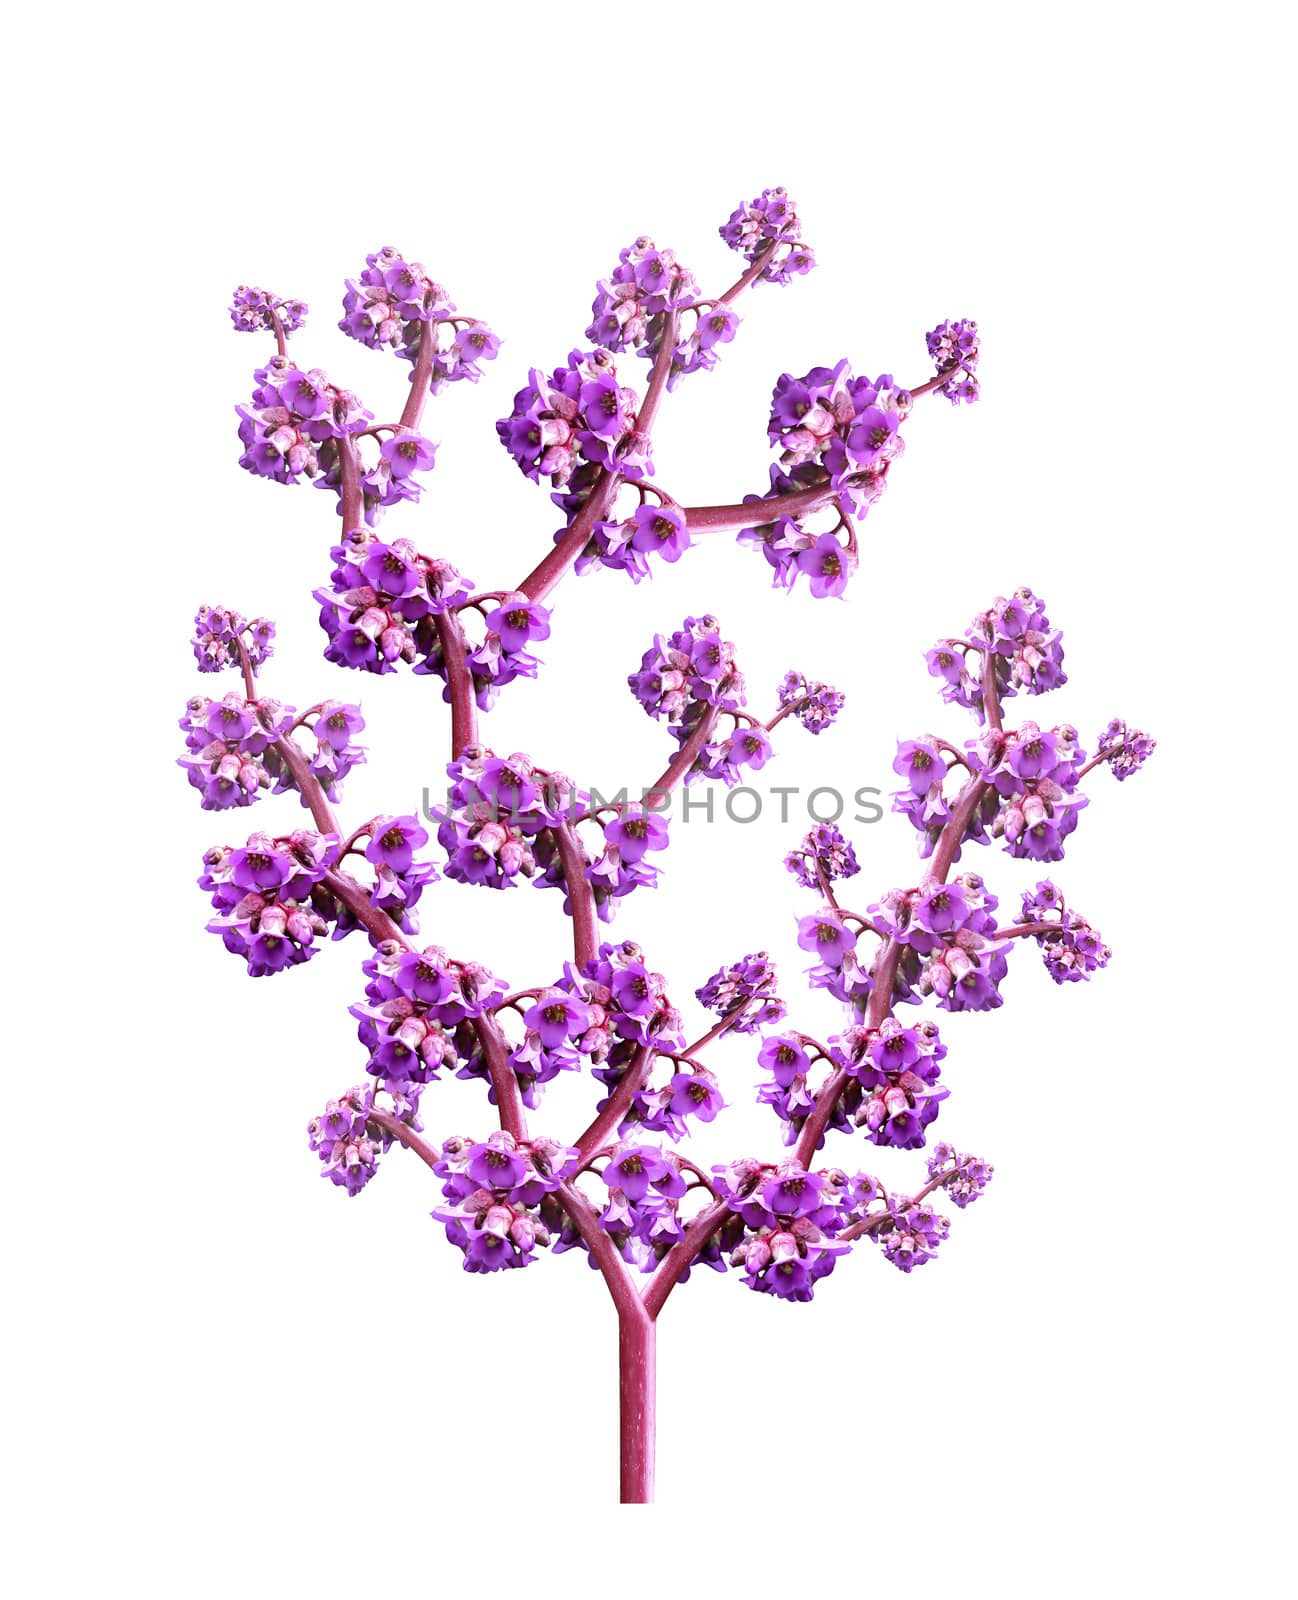 Photomontage background for a card in the form of a tree with pink flowers petals on white background